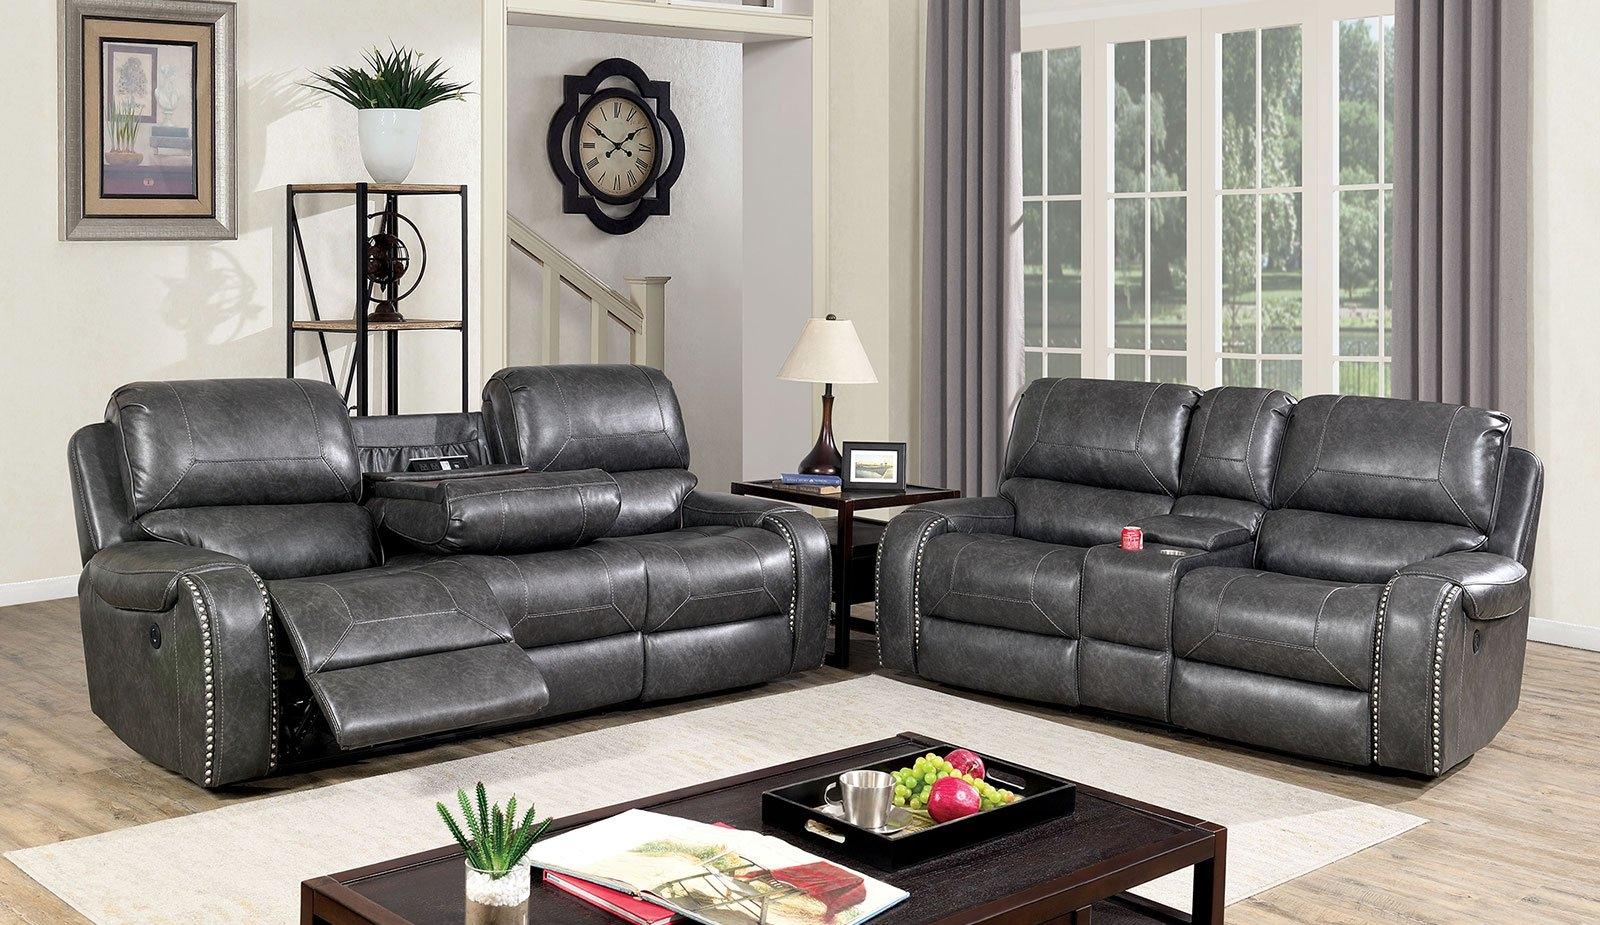 Transitional Recliner Sofa and Loveseat CM6950GY-2PC Walter CM6950GY-2PC in Gray Leatherette